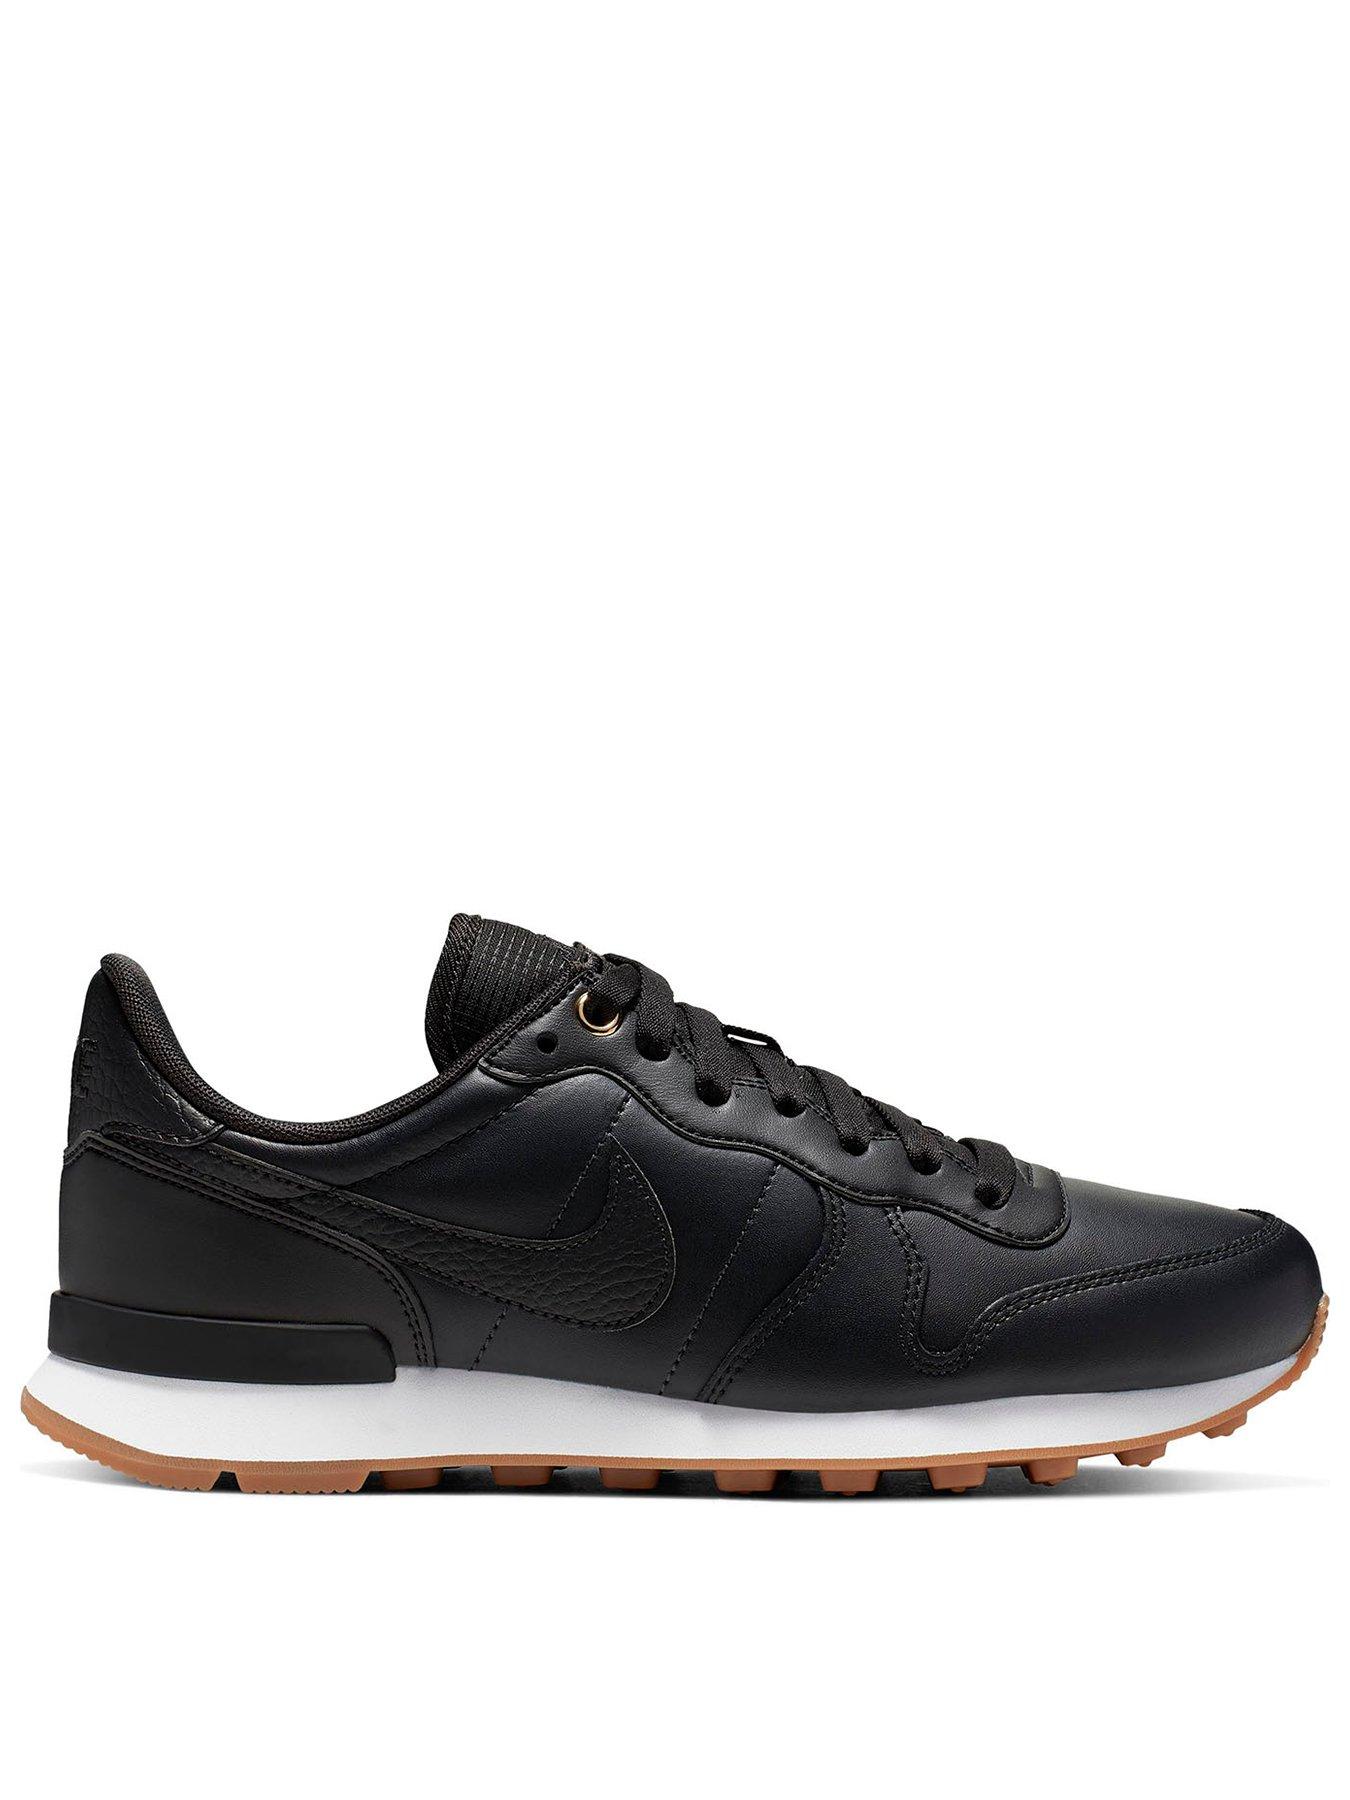 mens black leather nike trainers